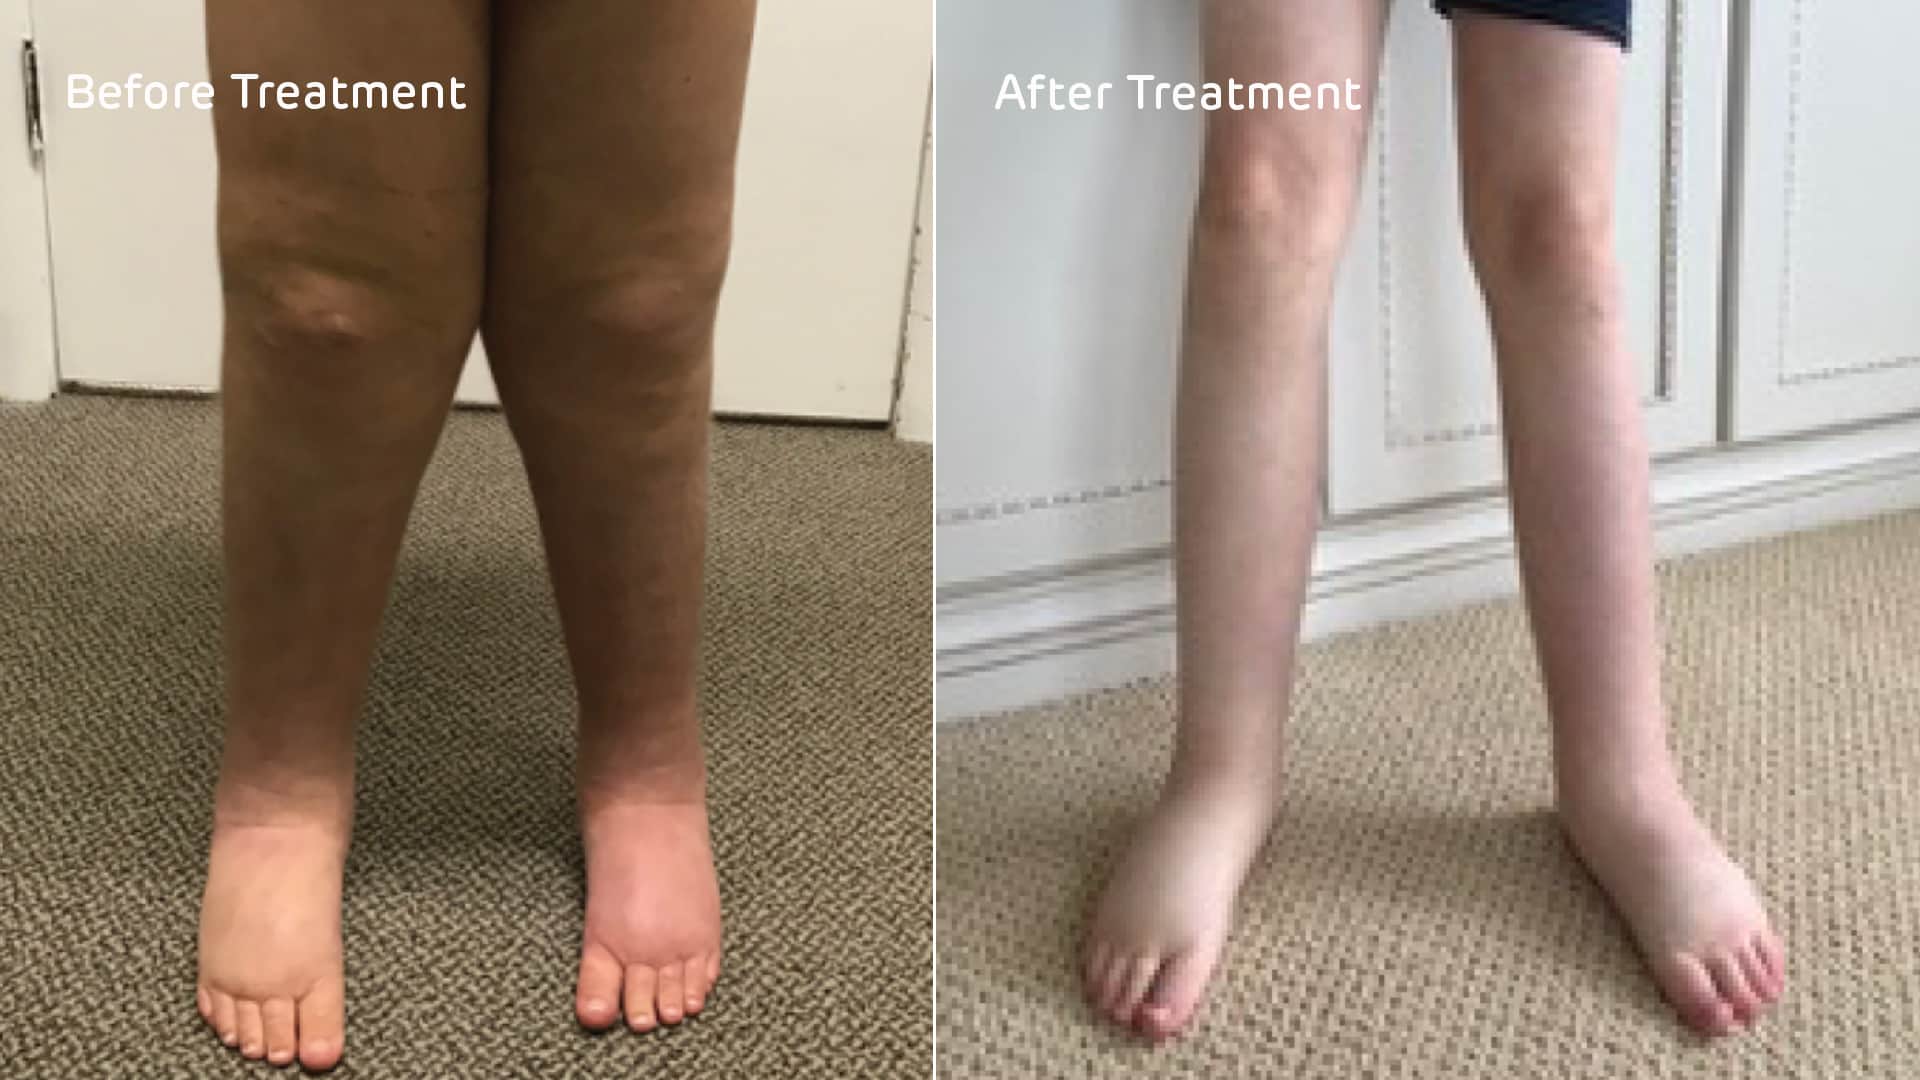 Swelling in legs - Before and after